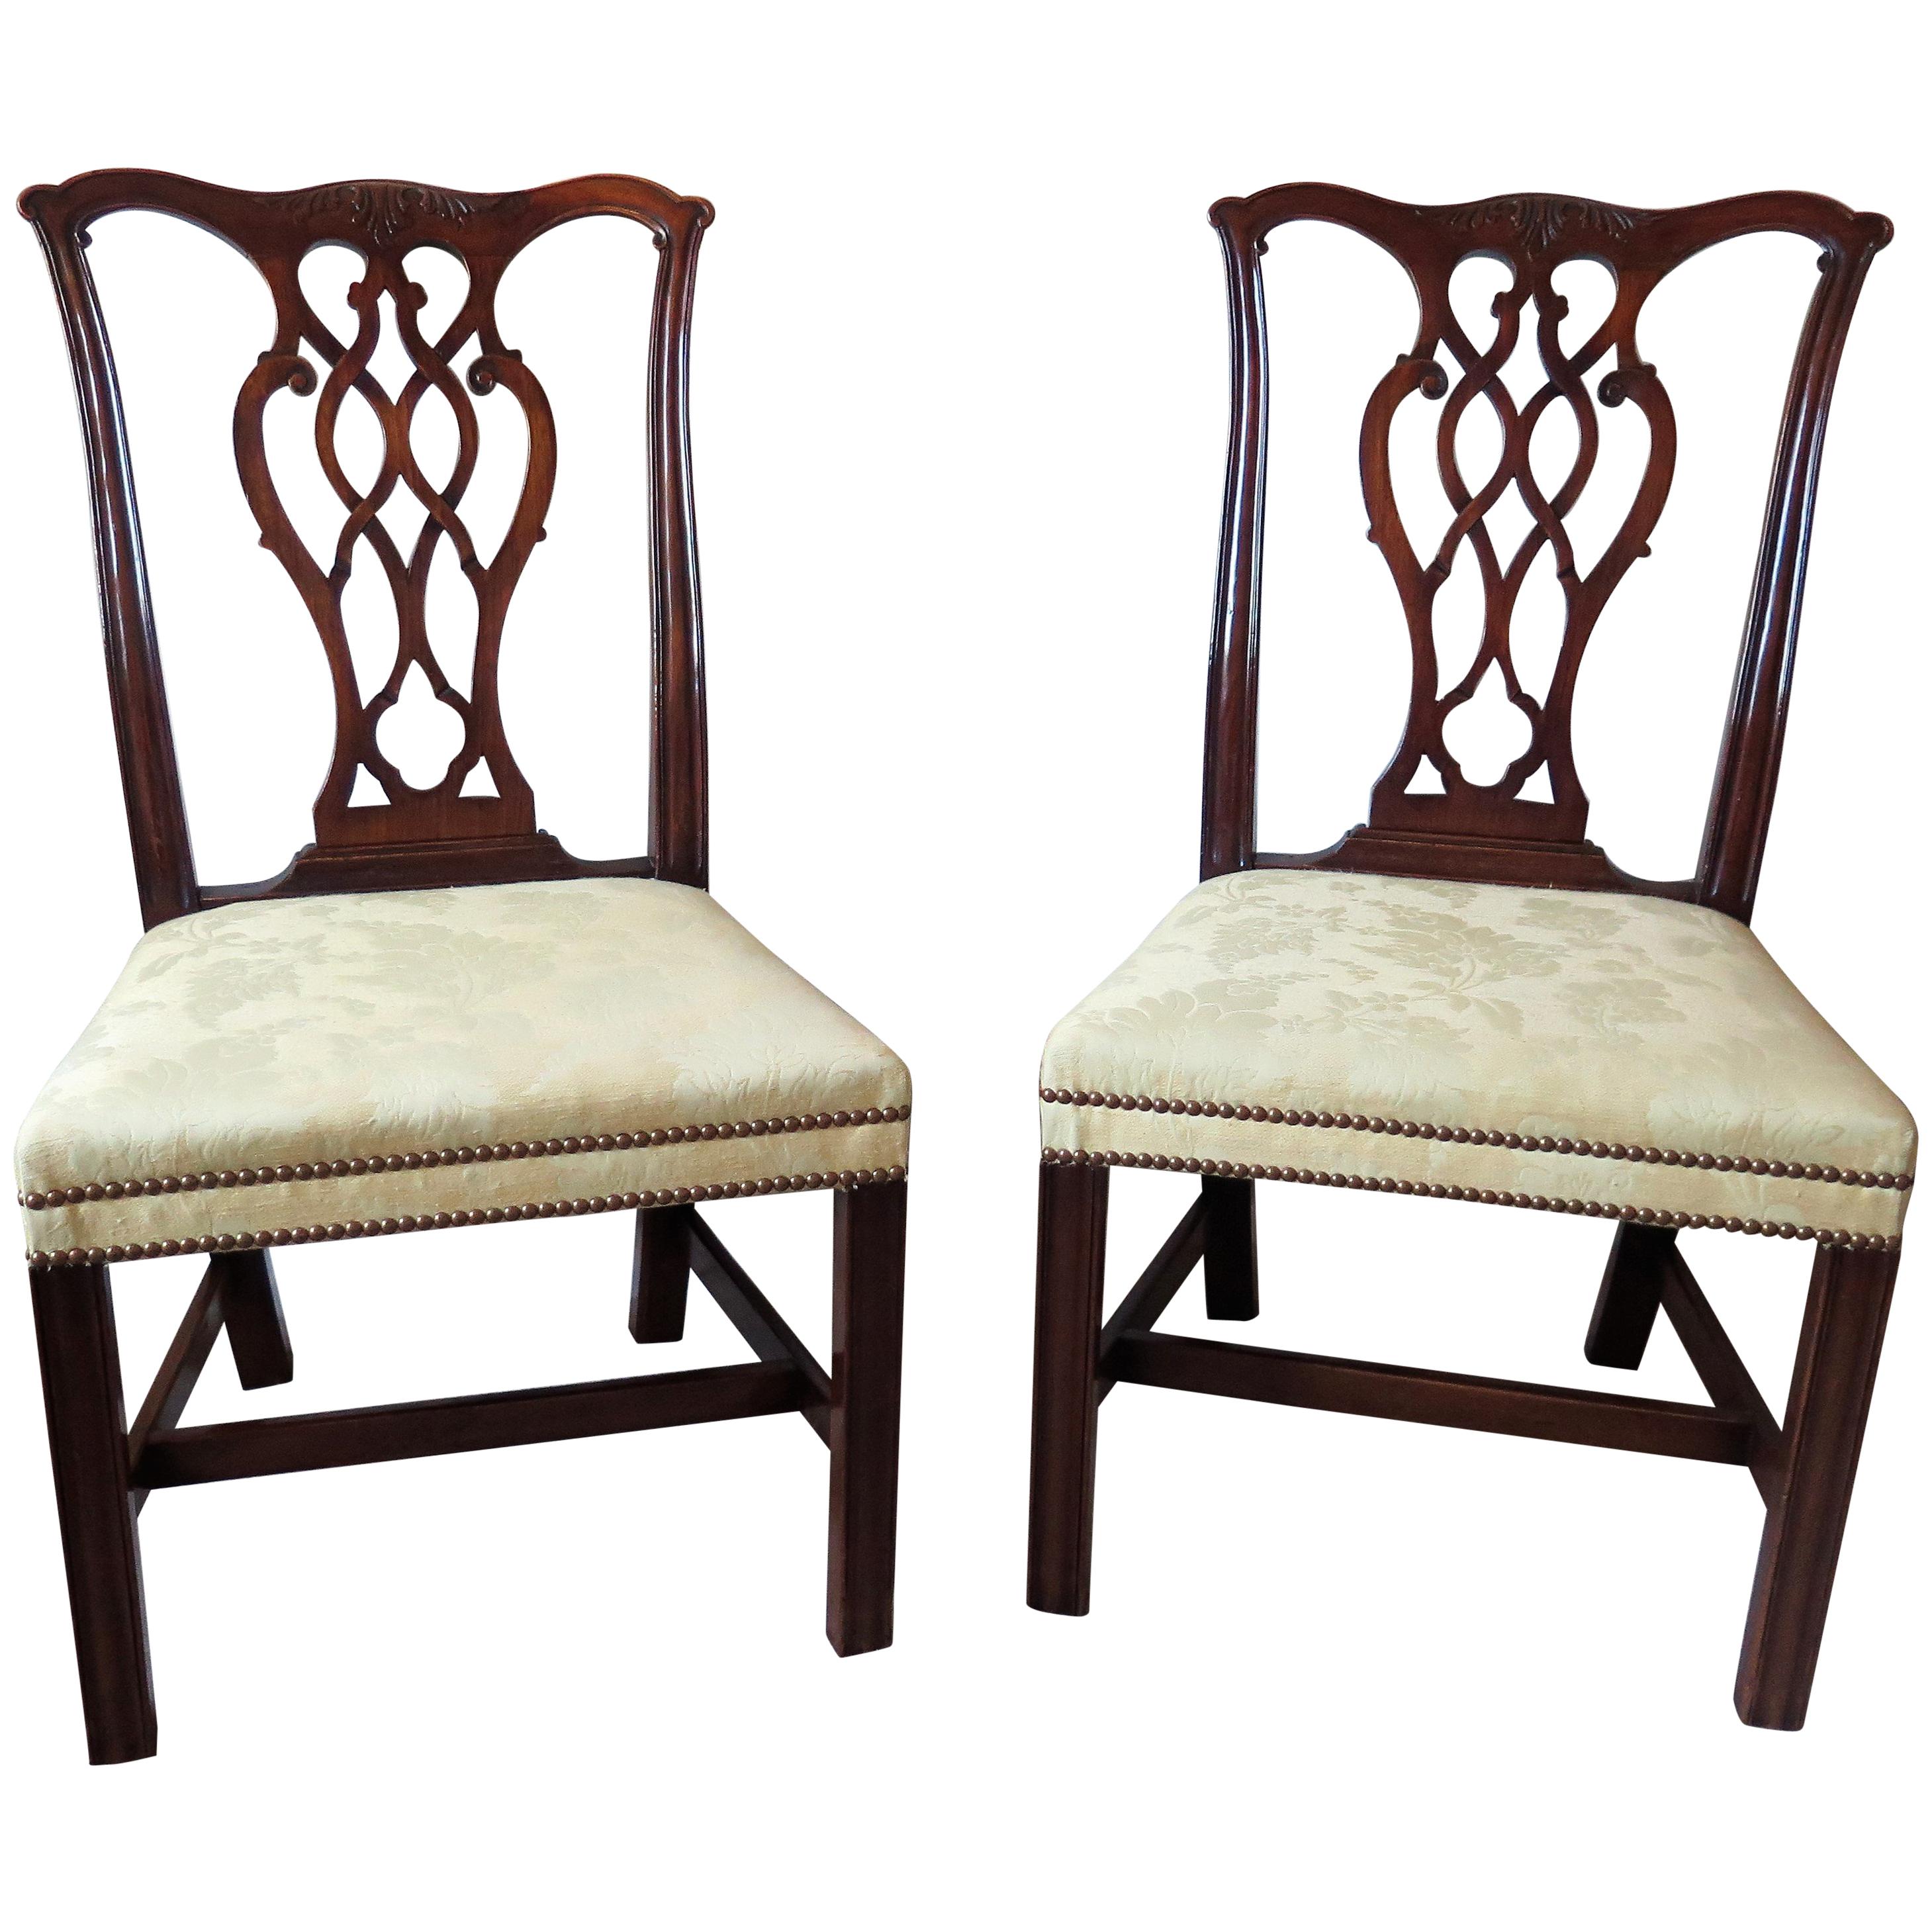 Pair of Elegant George 111 Mahogany Chippendale Chairs Reupholstered, Circa 1770